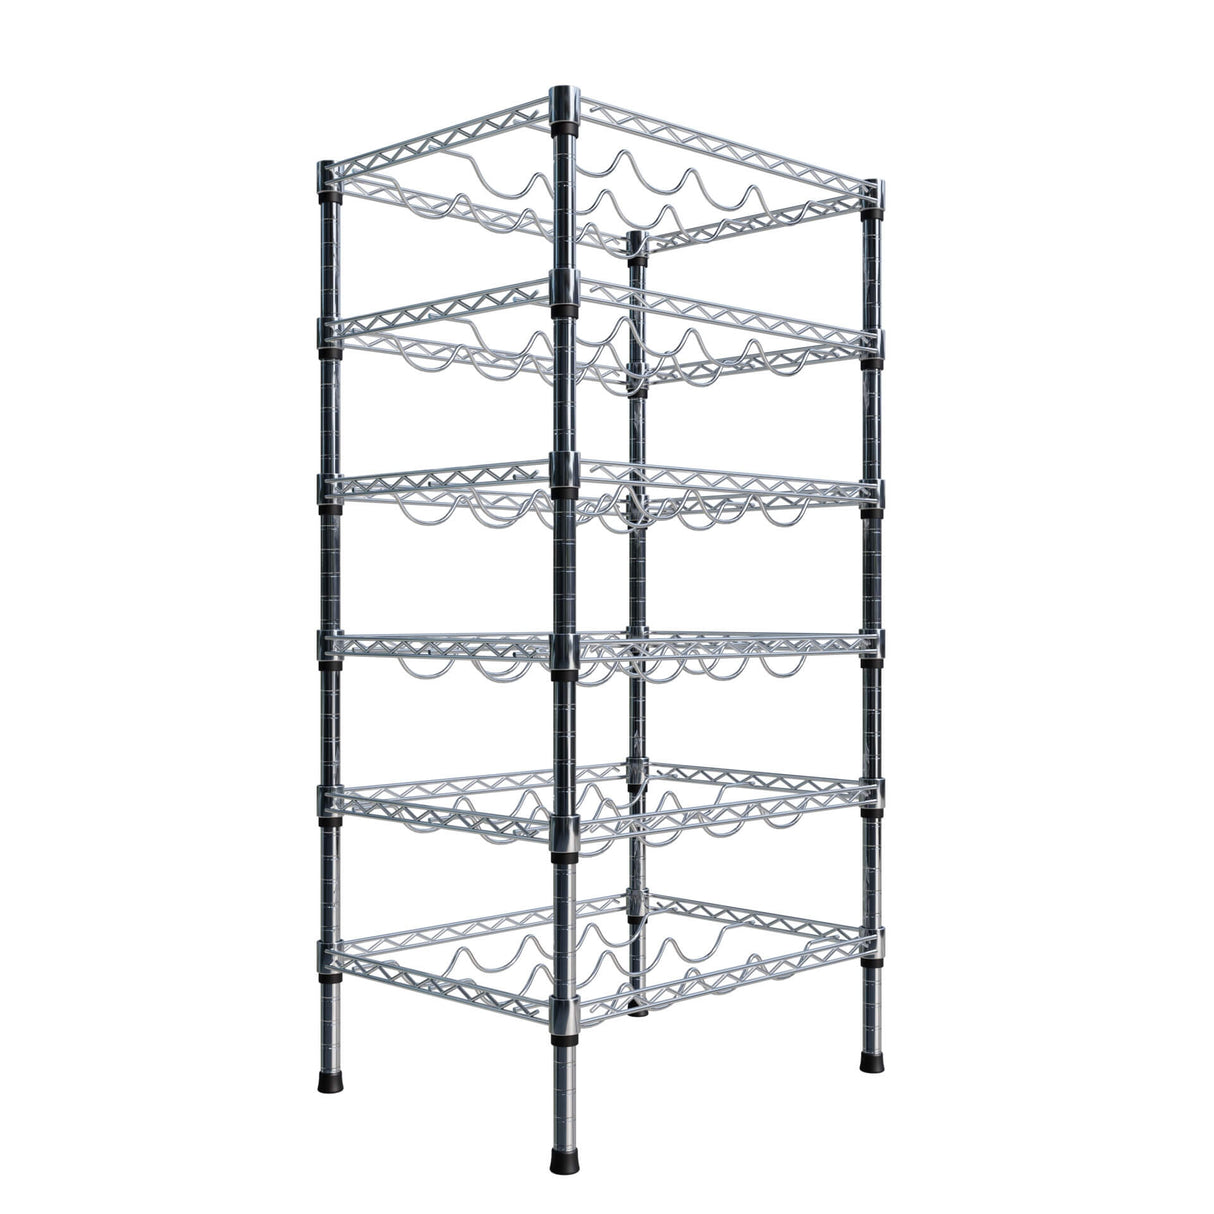 Empire Adjustable 6 Tier Chrome Wire Wine Bottle Rack 24 Bottle Capacity - EMP-WRACK6 Chrome Wire Shelving and Racking Empire   